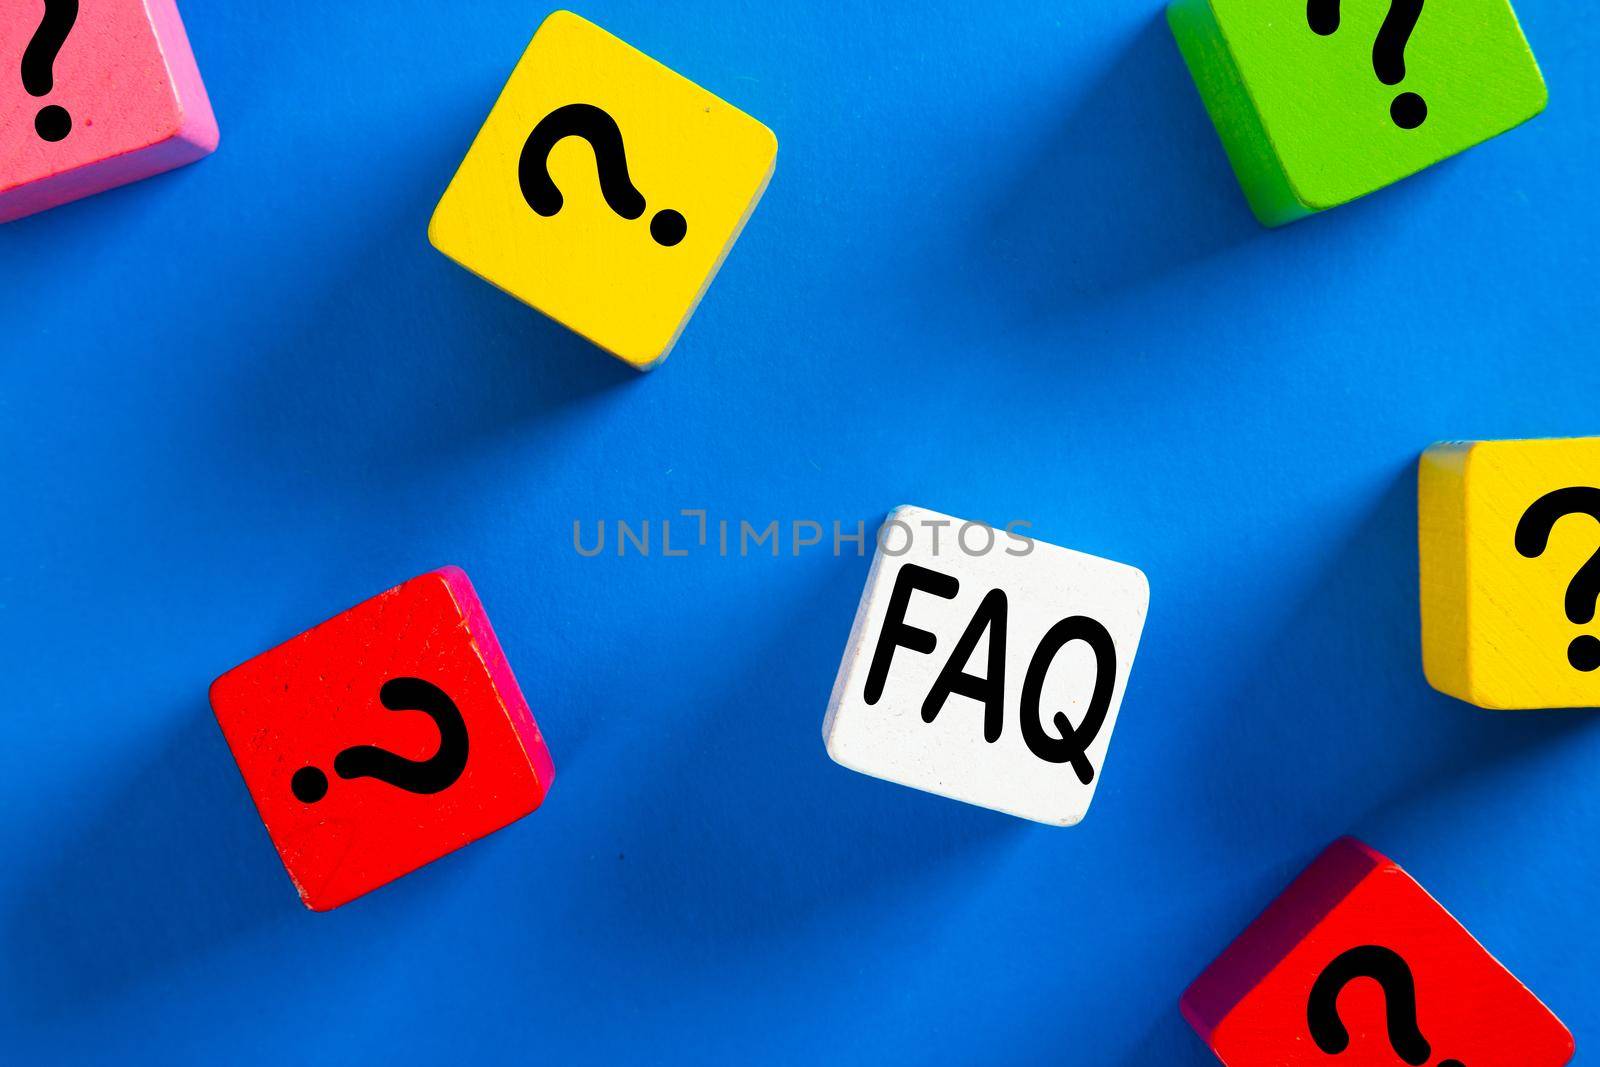 Question mark icon on blue wooden block on blue background. Q&A or FAQ concept.